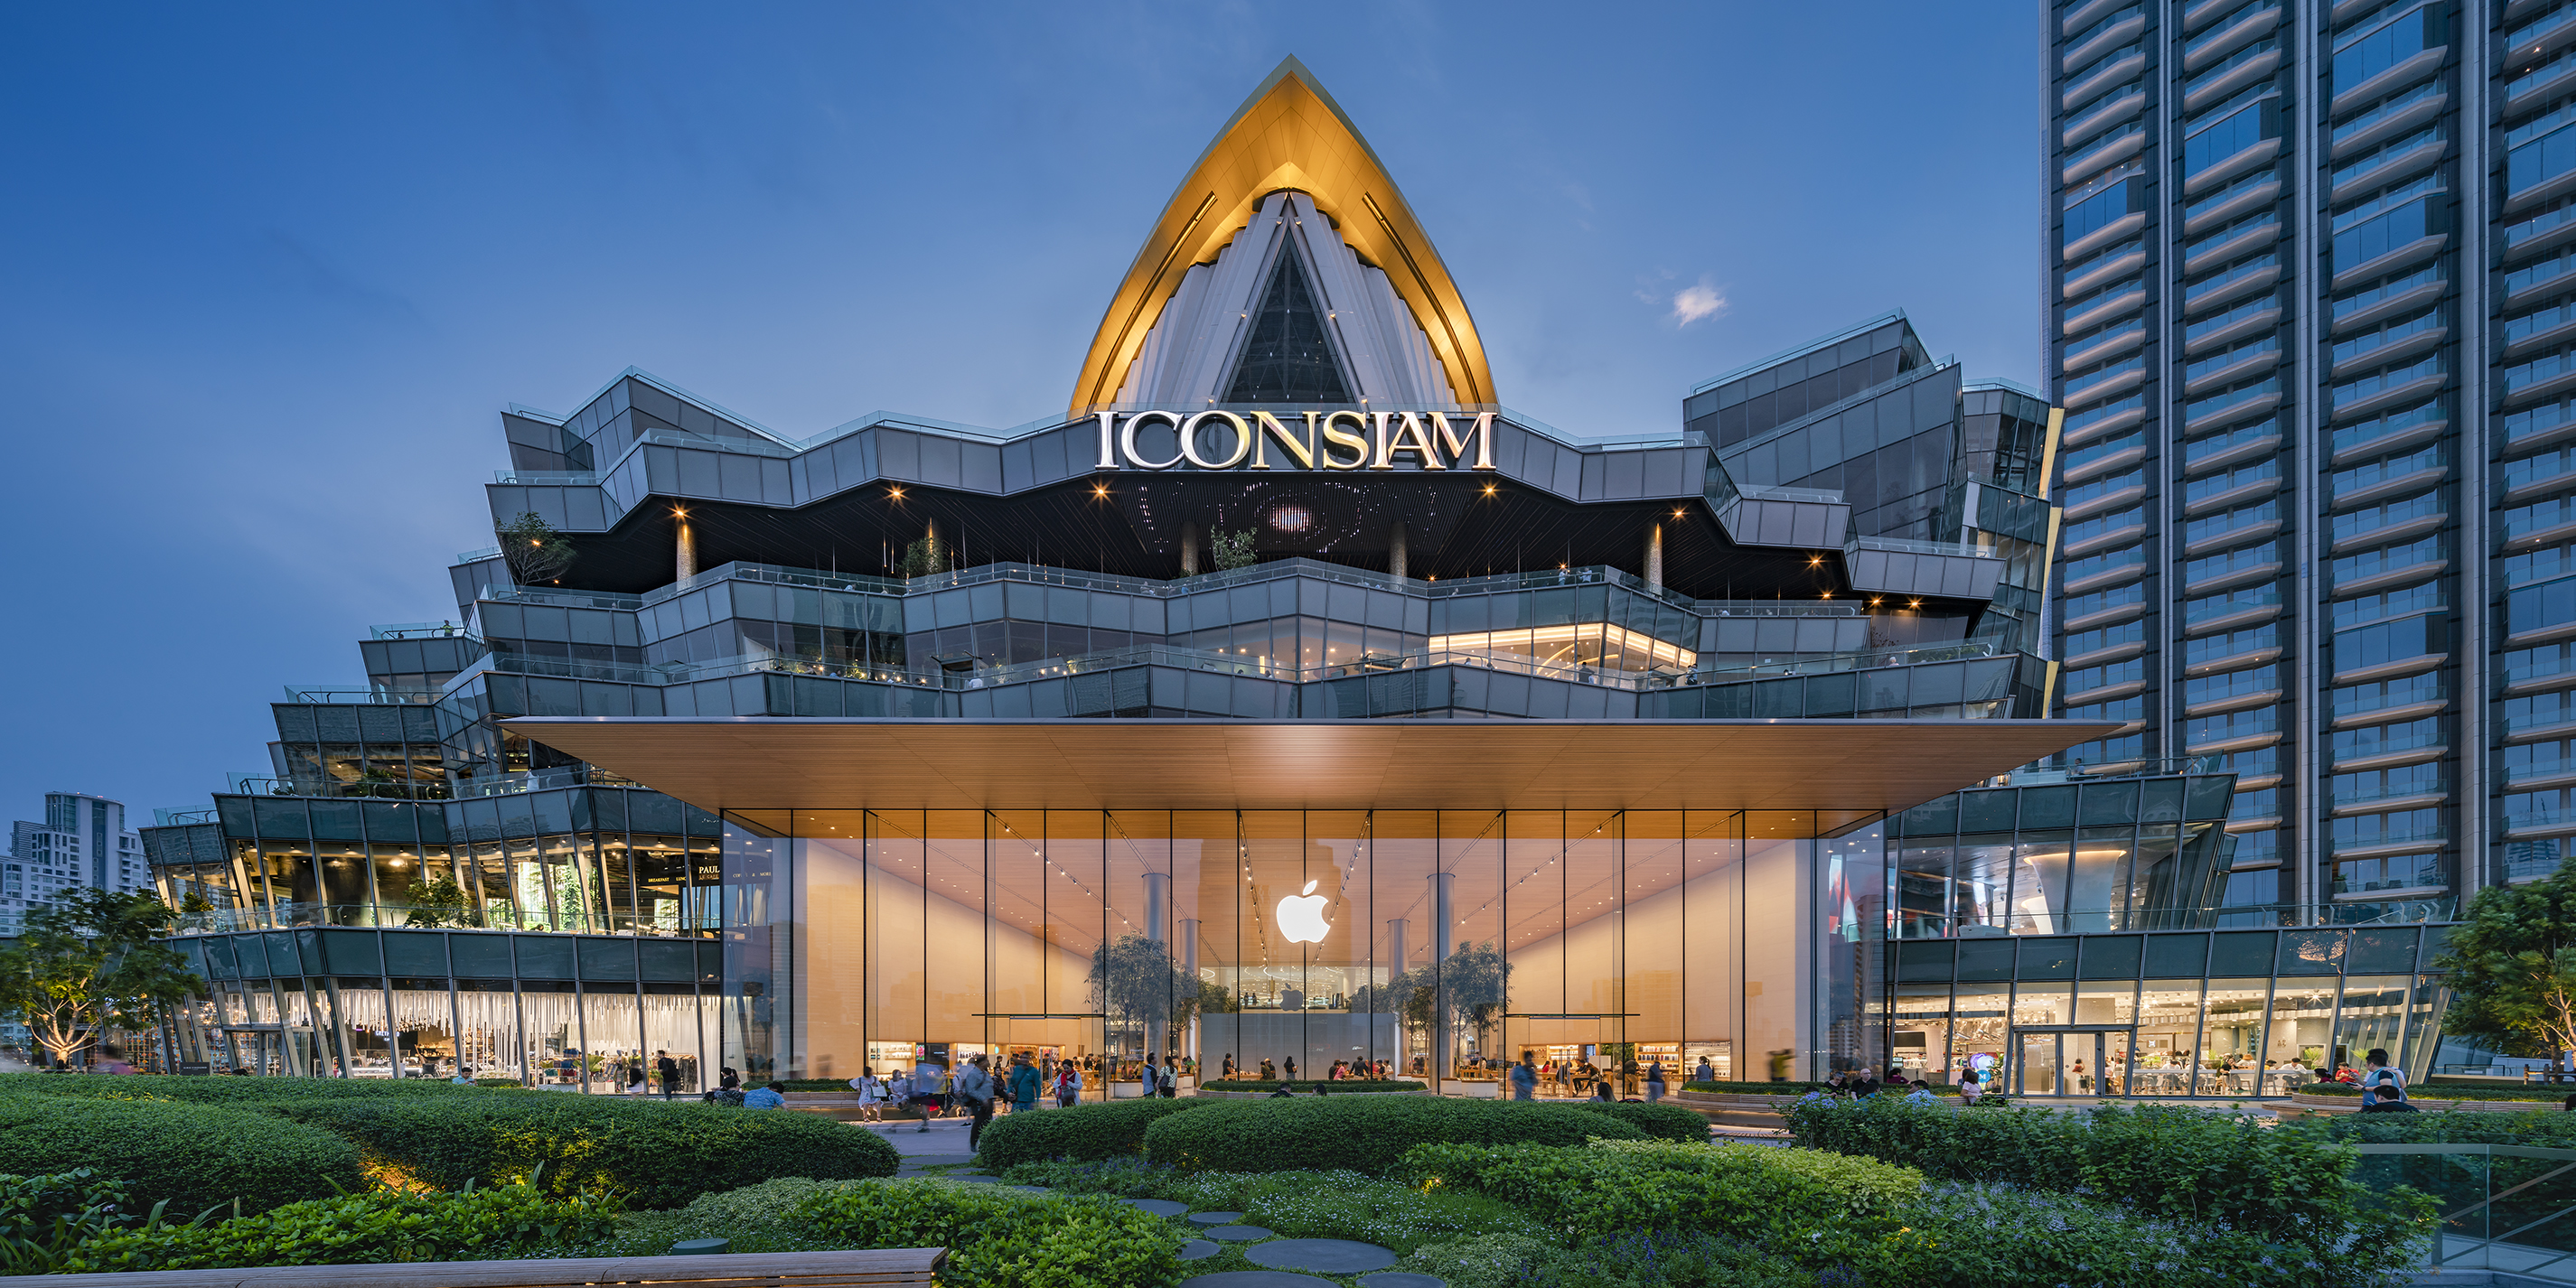 ICONSIAM : Attractions